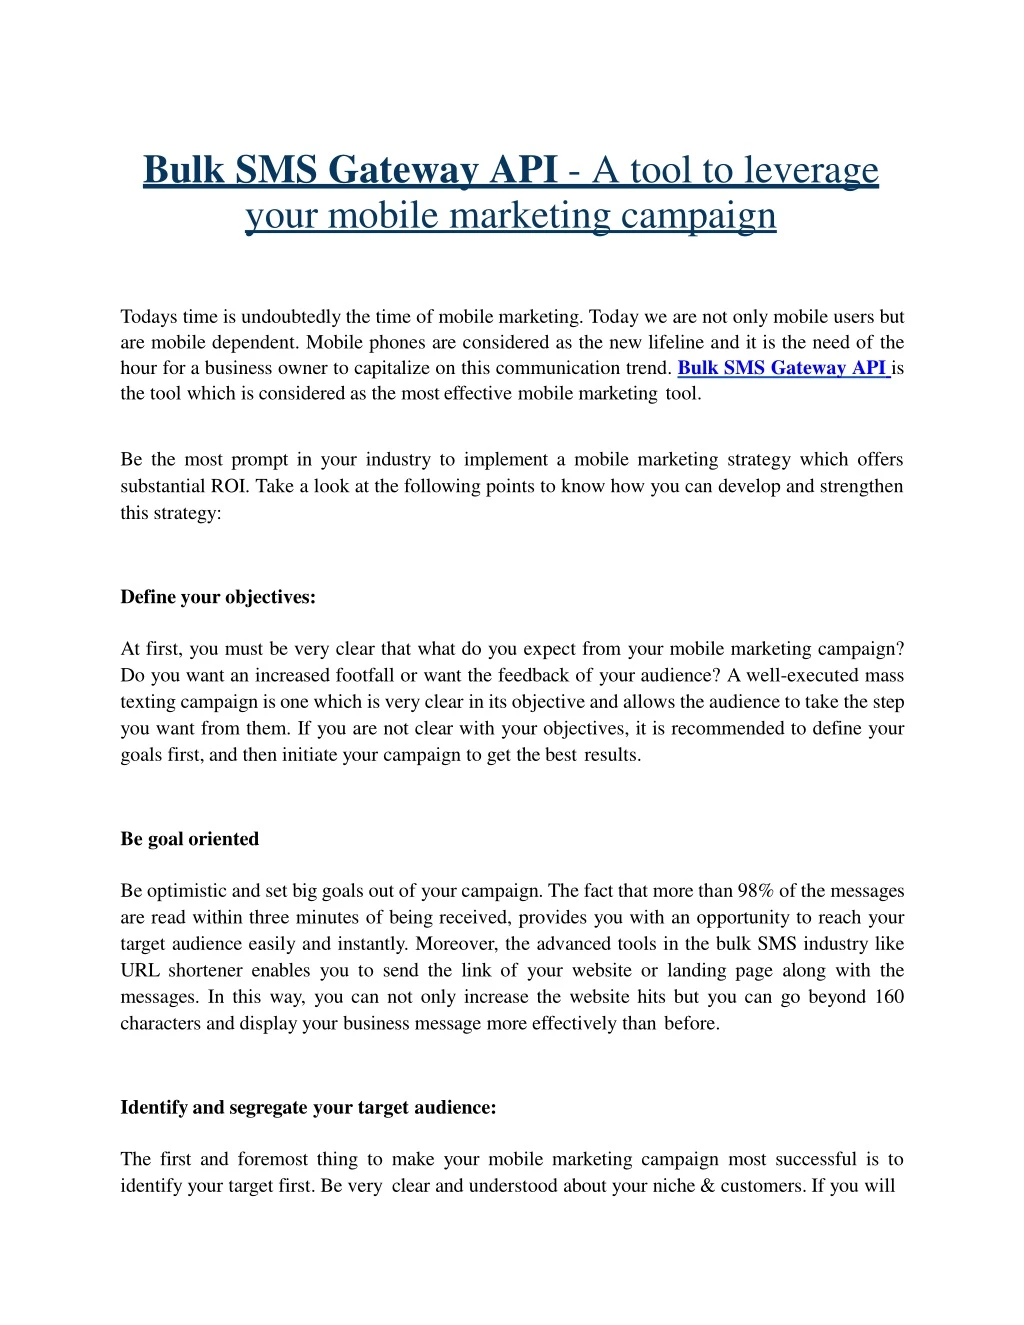 bulk sms gateway api a tool to leverage your mobile marketing campaign